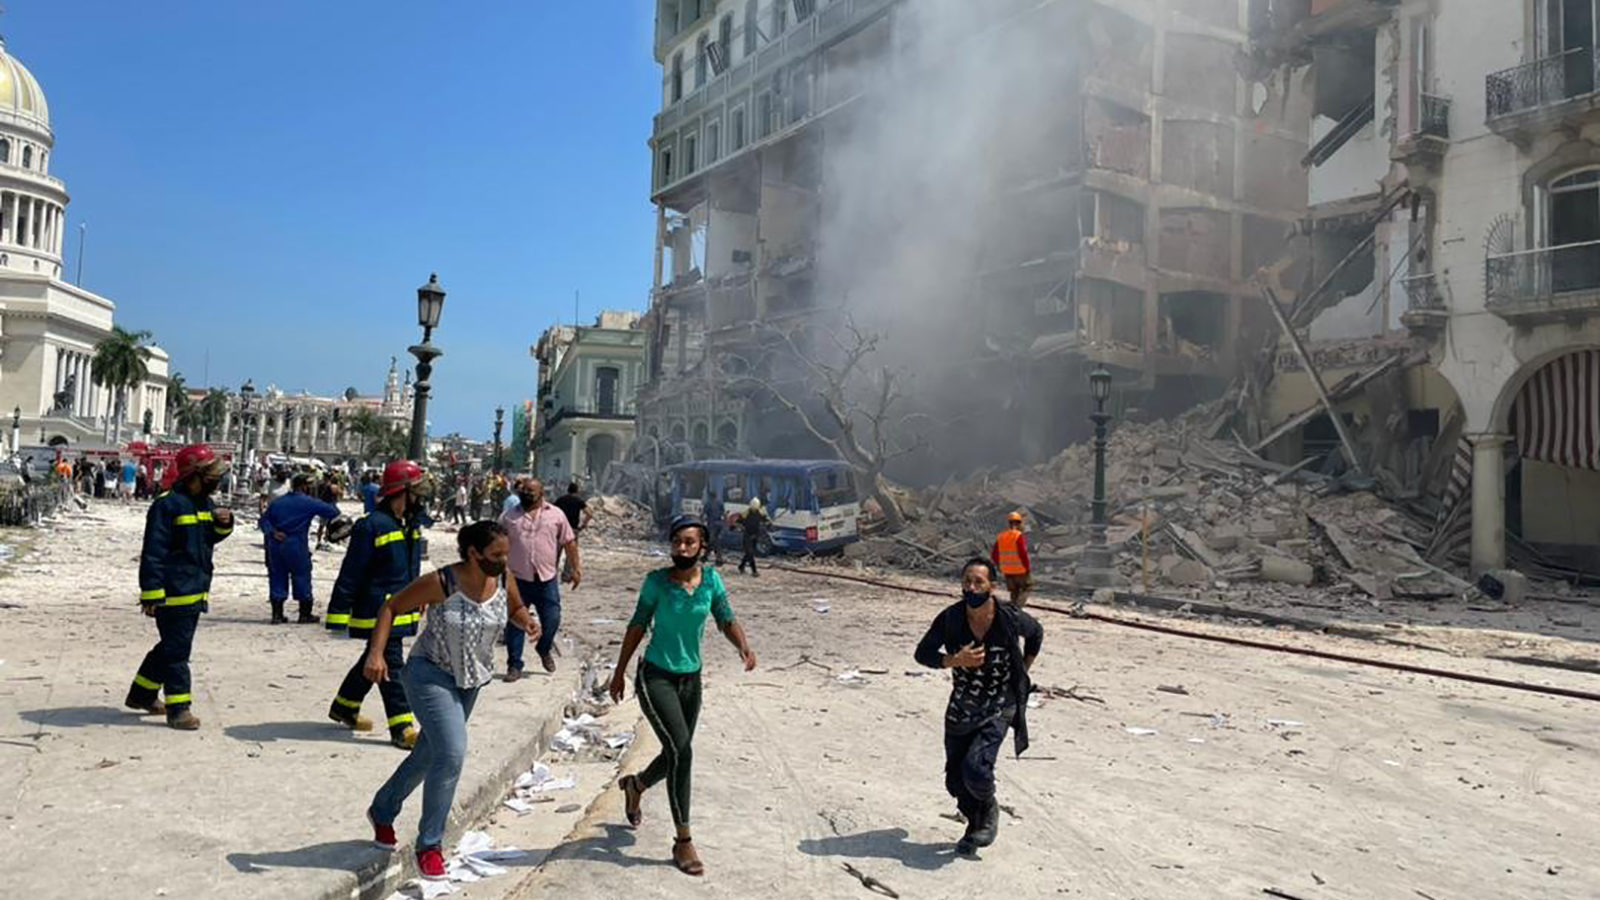 An explosion rocked Havana, Cuba Friday and destroyed the Hotel Saratoga. Cuban police and fire res...